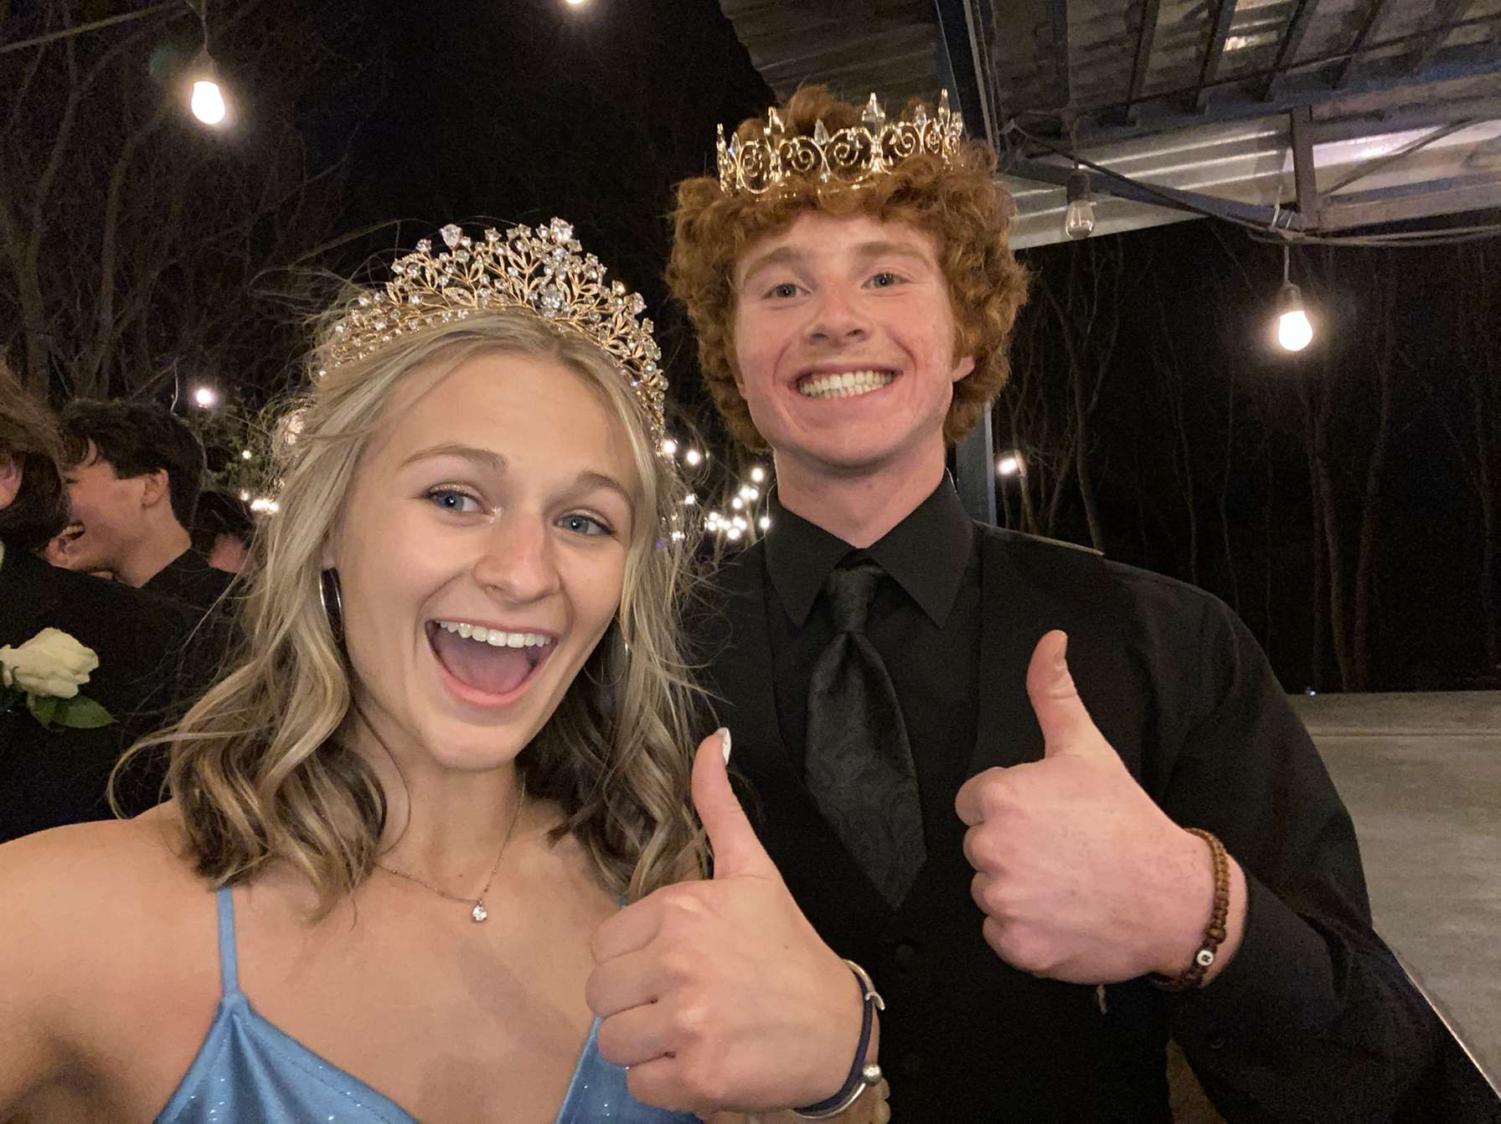 Middletown Teens Crowned Prom King And Queen